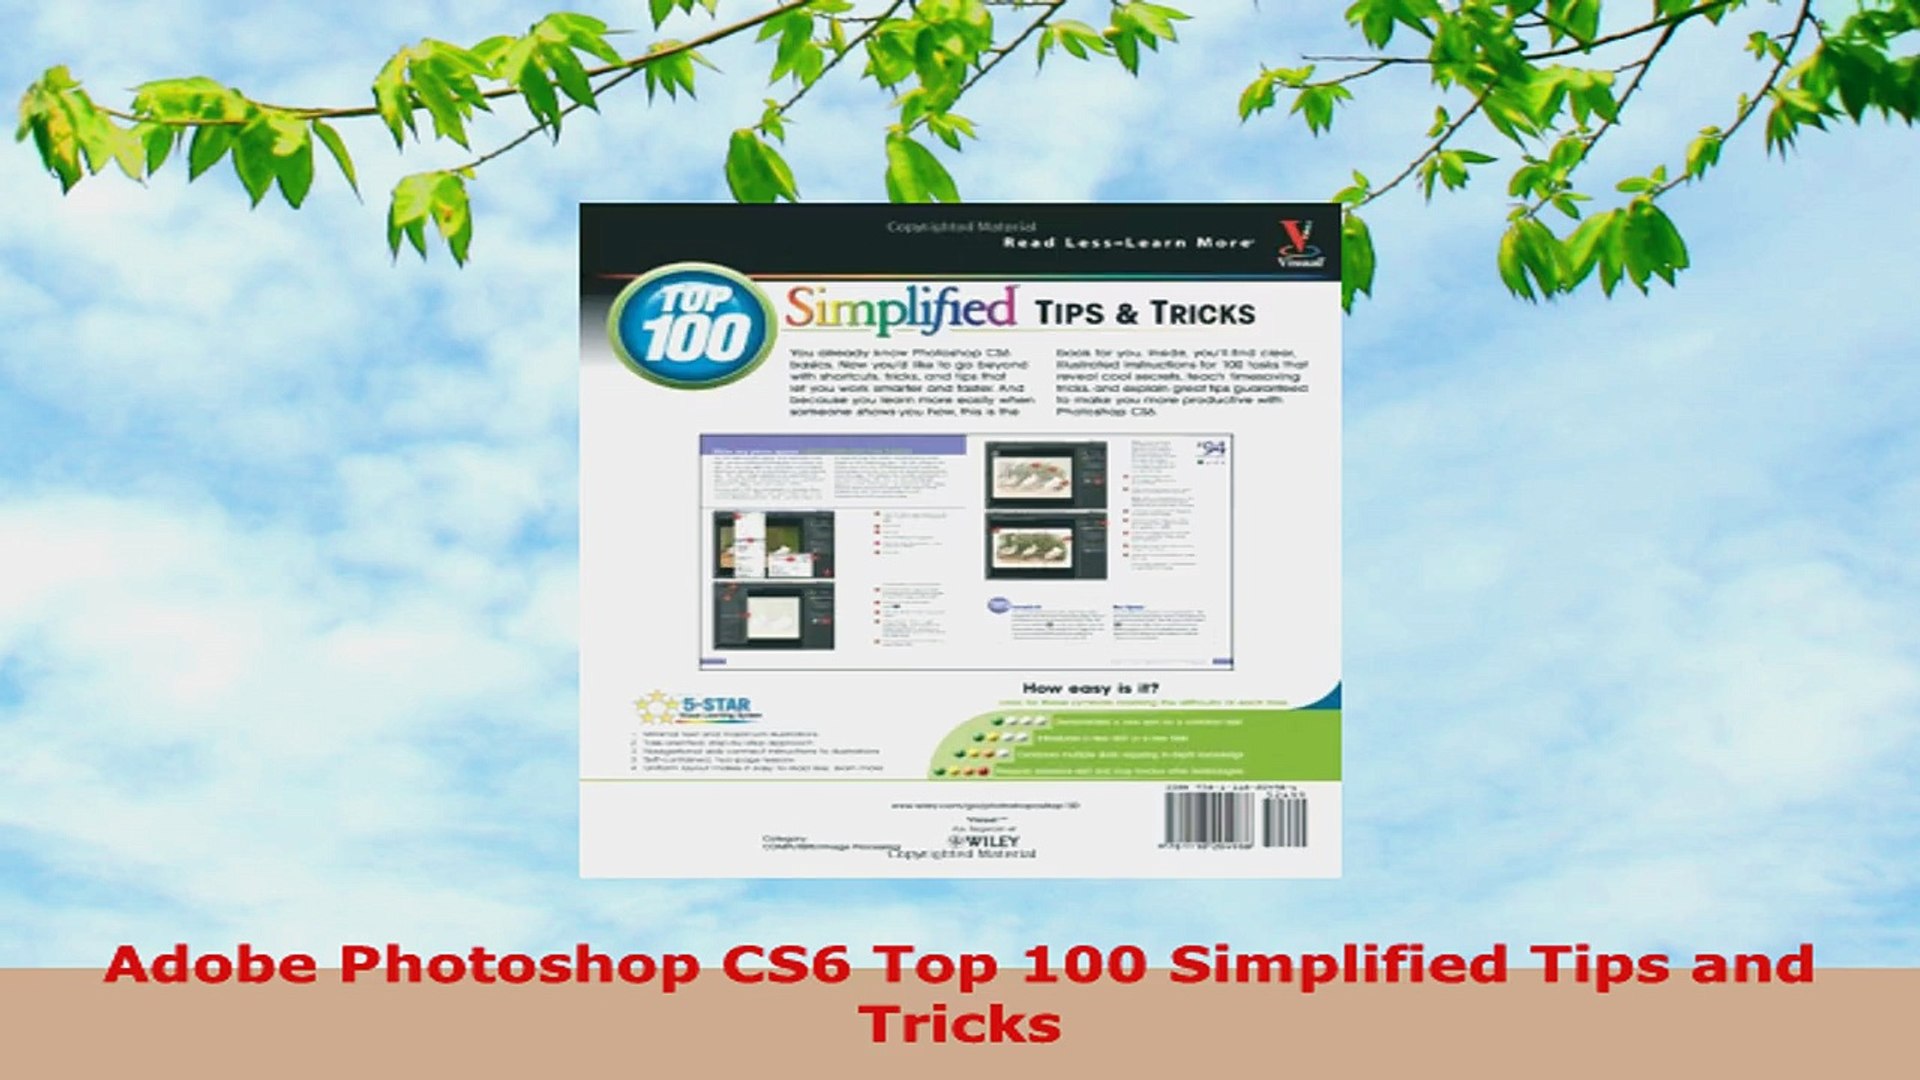 Buy Photoshop CS6 Top 100 Simplified Tips and Tricks